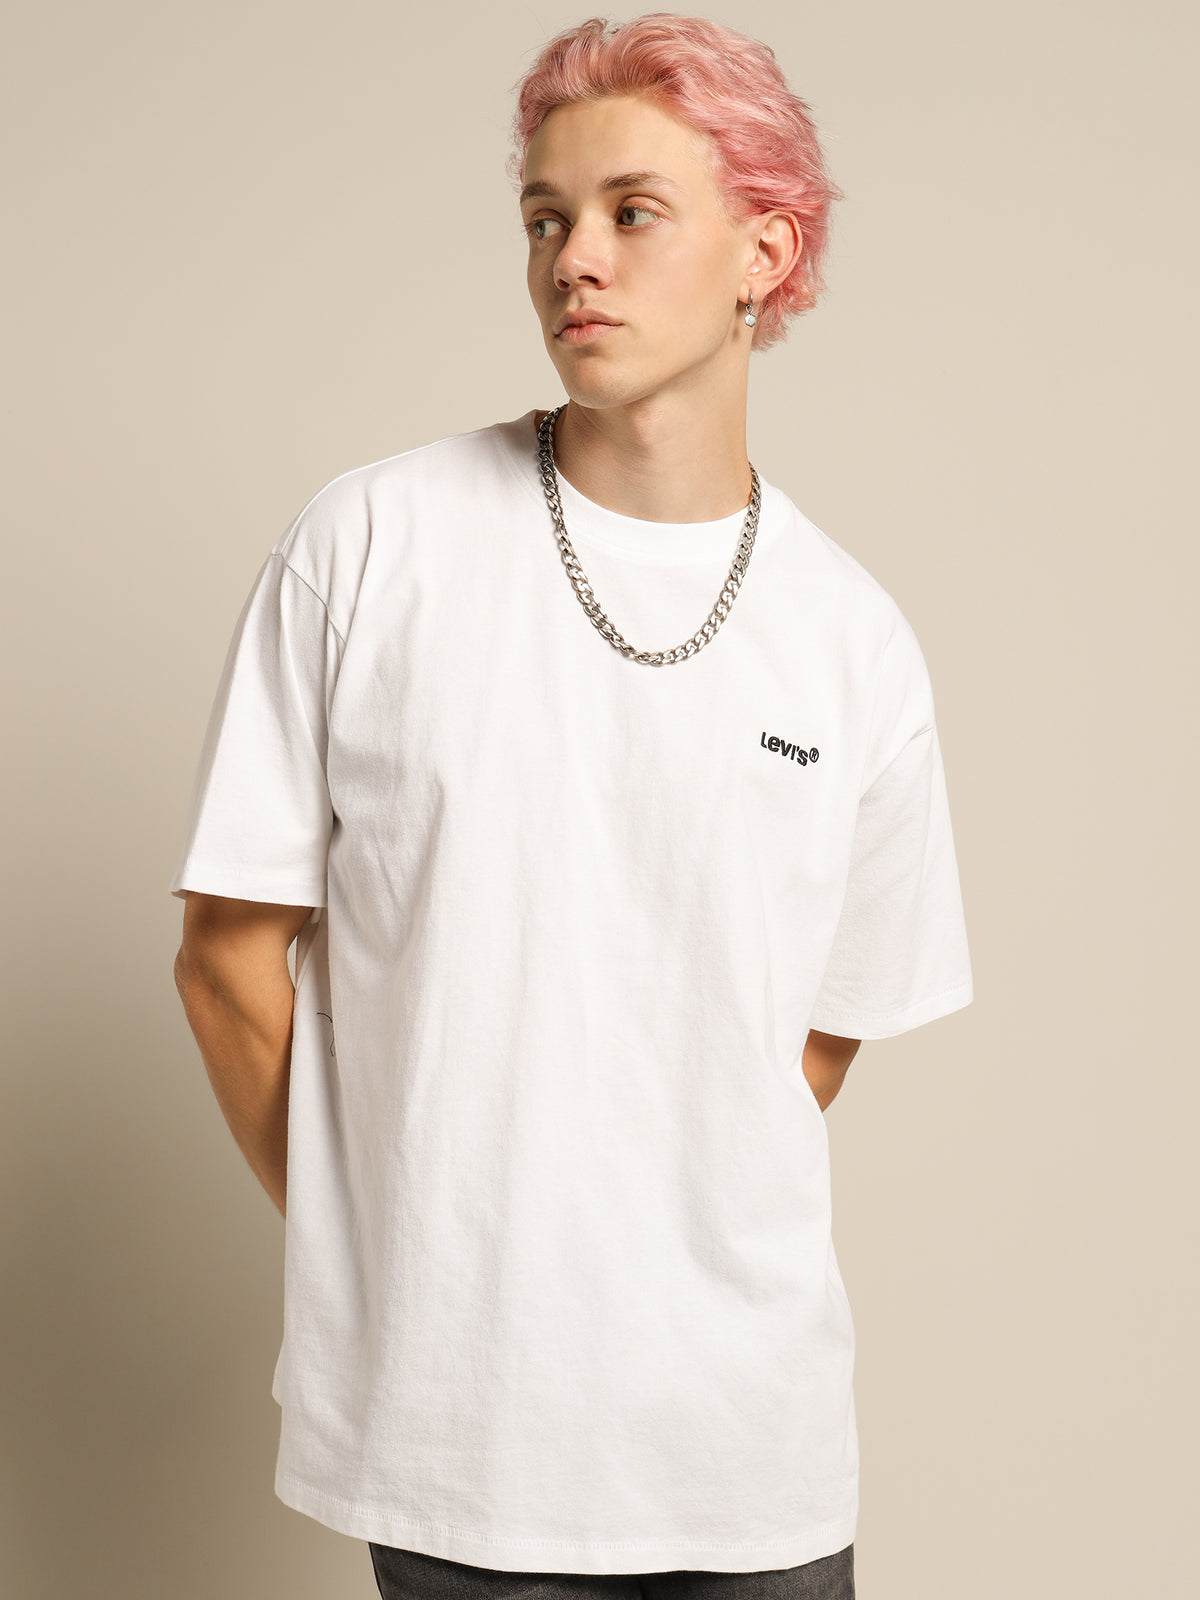 Red Tab Vintage T-Shirt in White